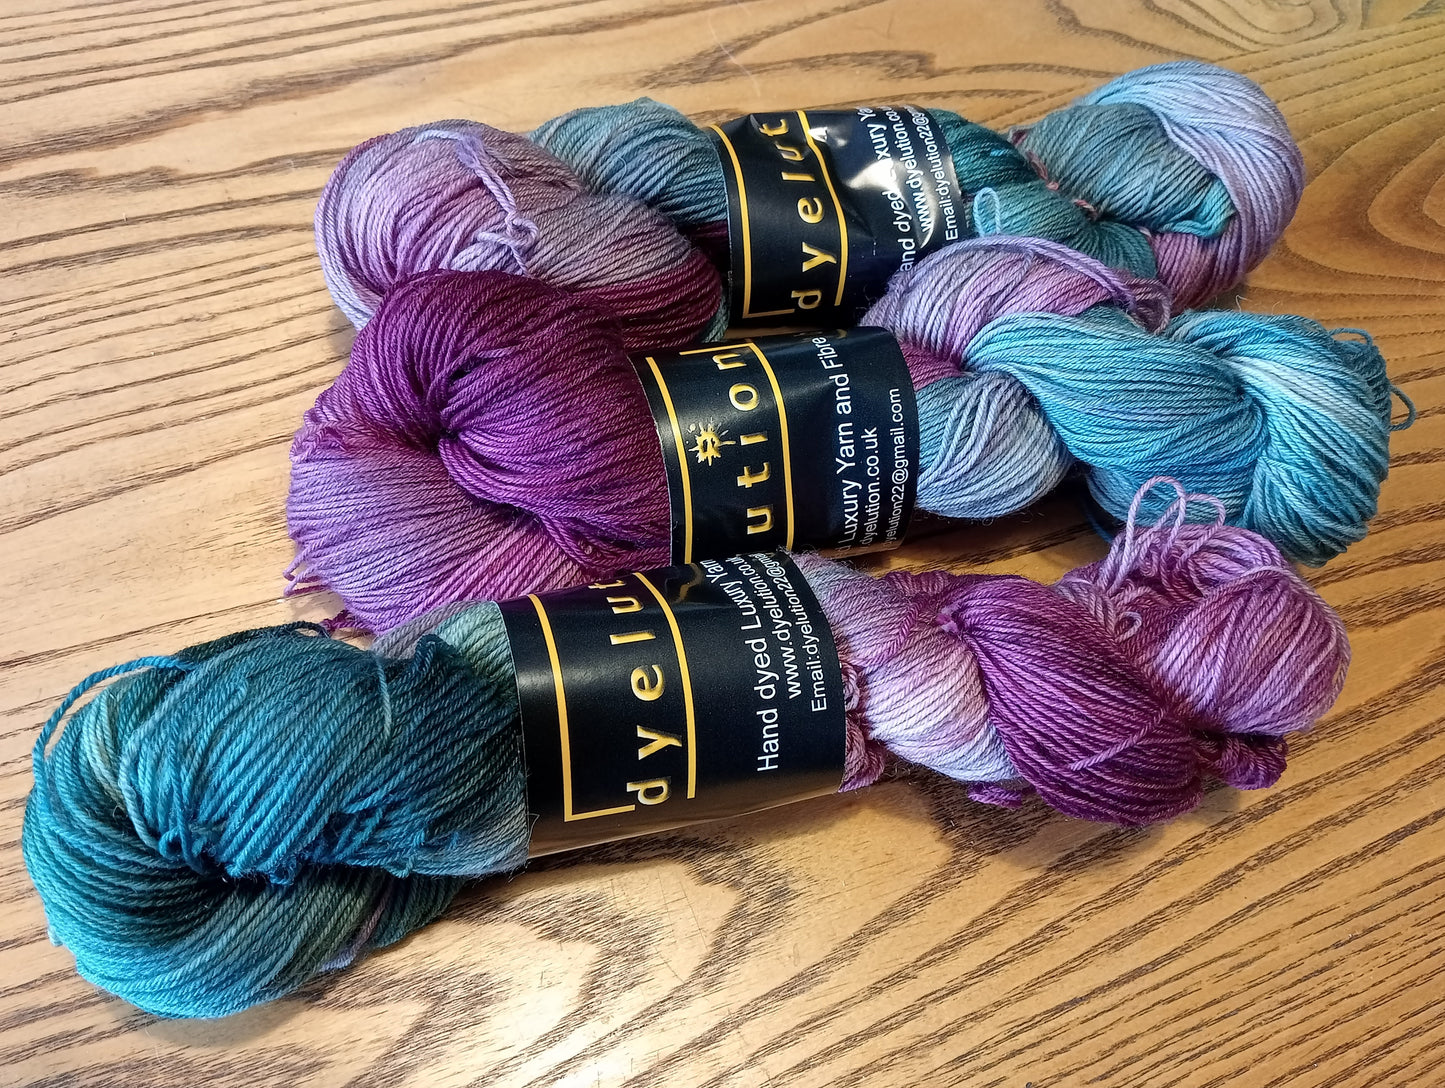 100G Bluefaced Leicester hand dyed 4 ply Yarn- "Whitianga Springs" - **SALE**